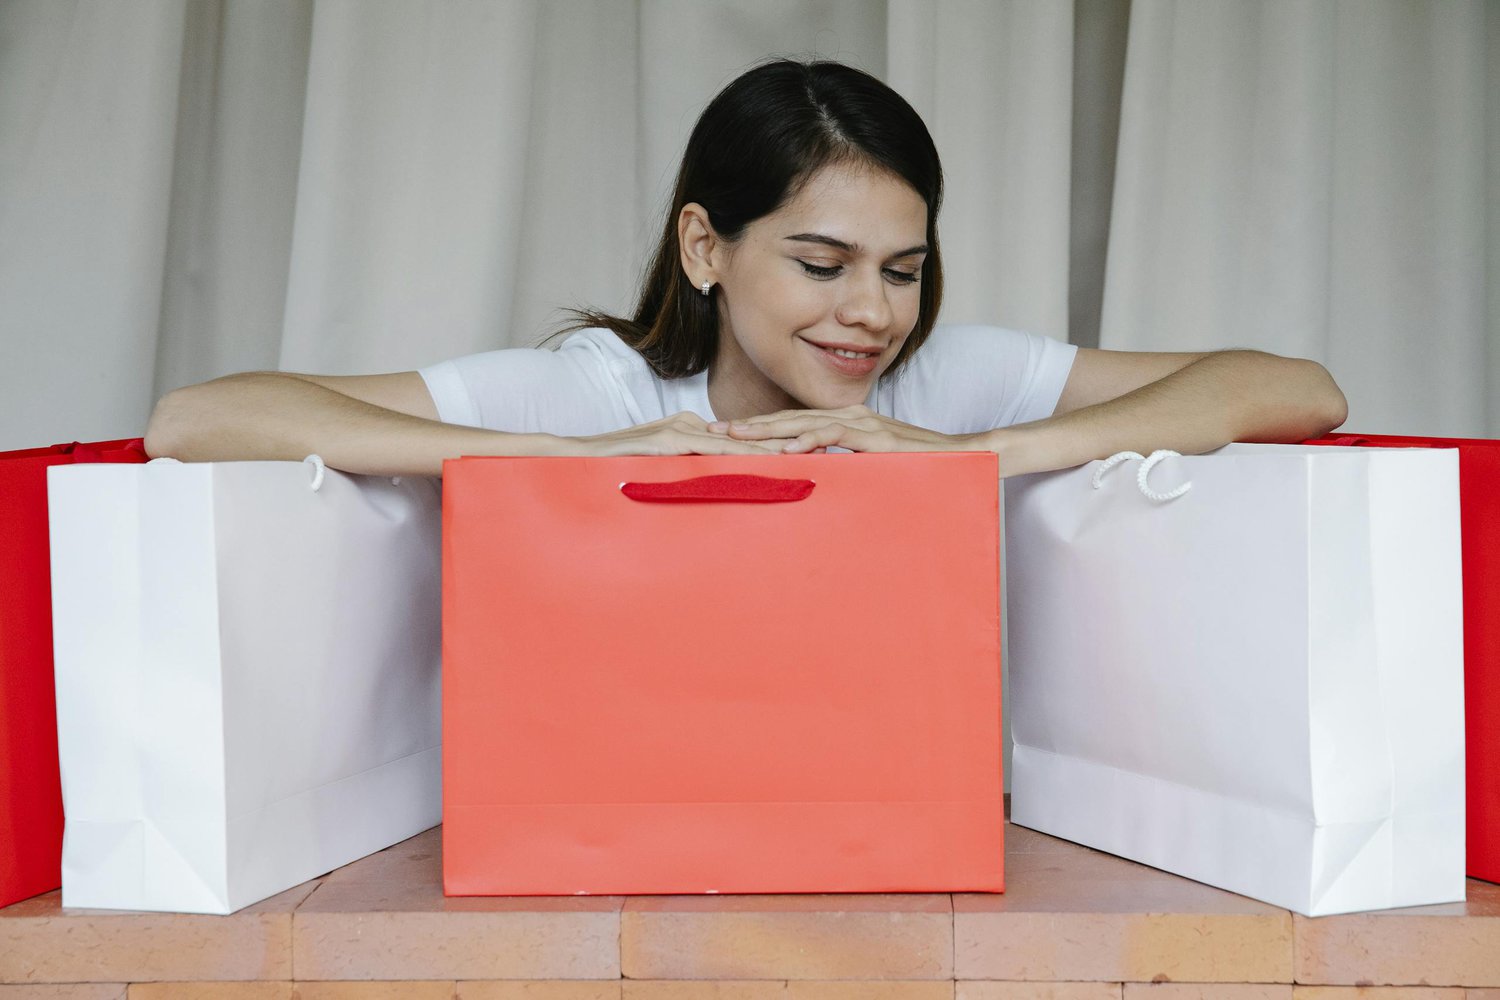 Excited young female leaning on shopping bags and smiling happily